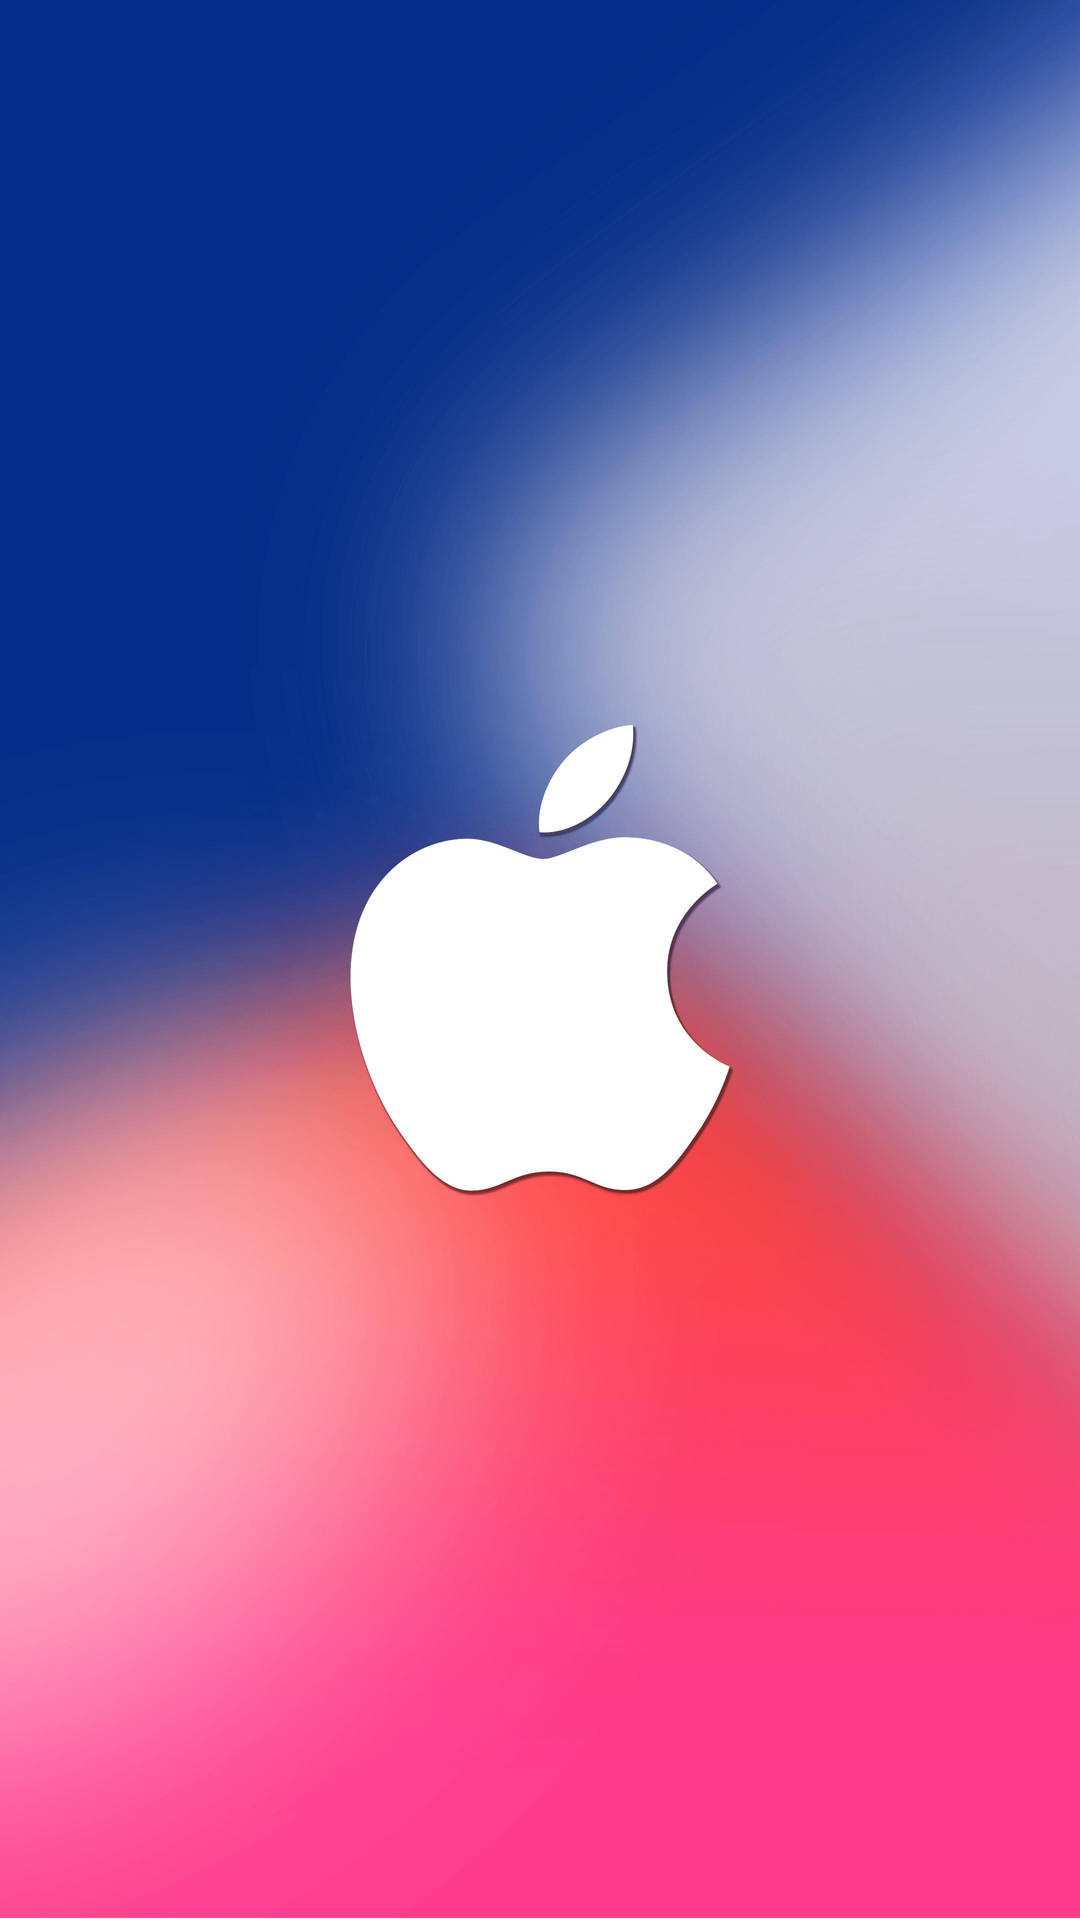 Iphone X Original Apple Logo On Blurred Colors Background